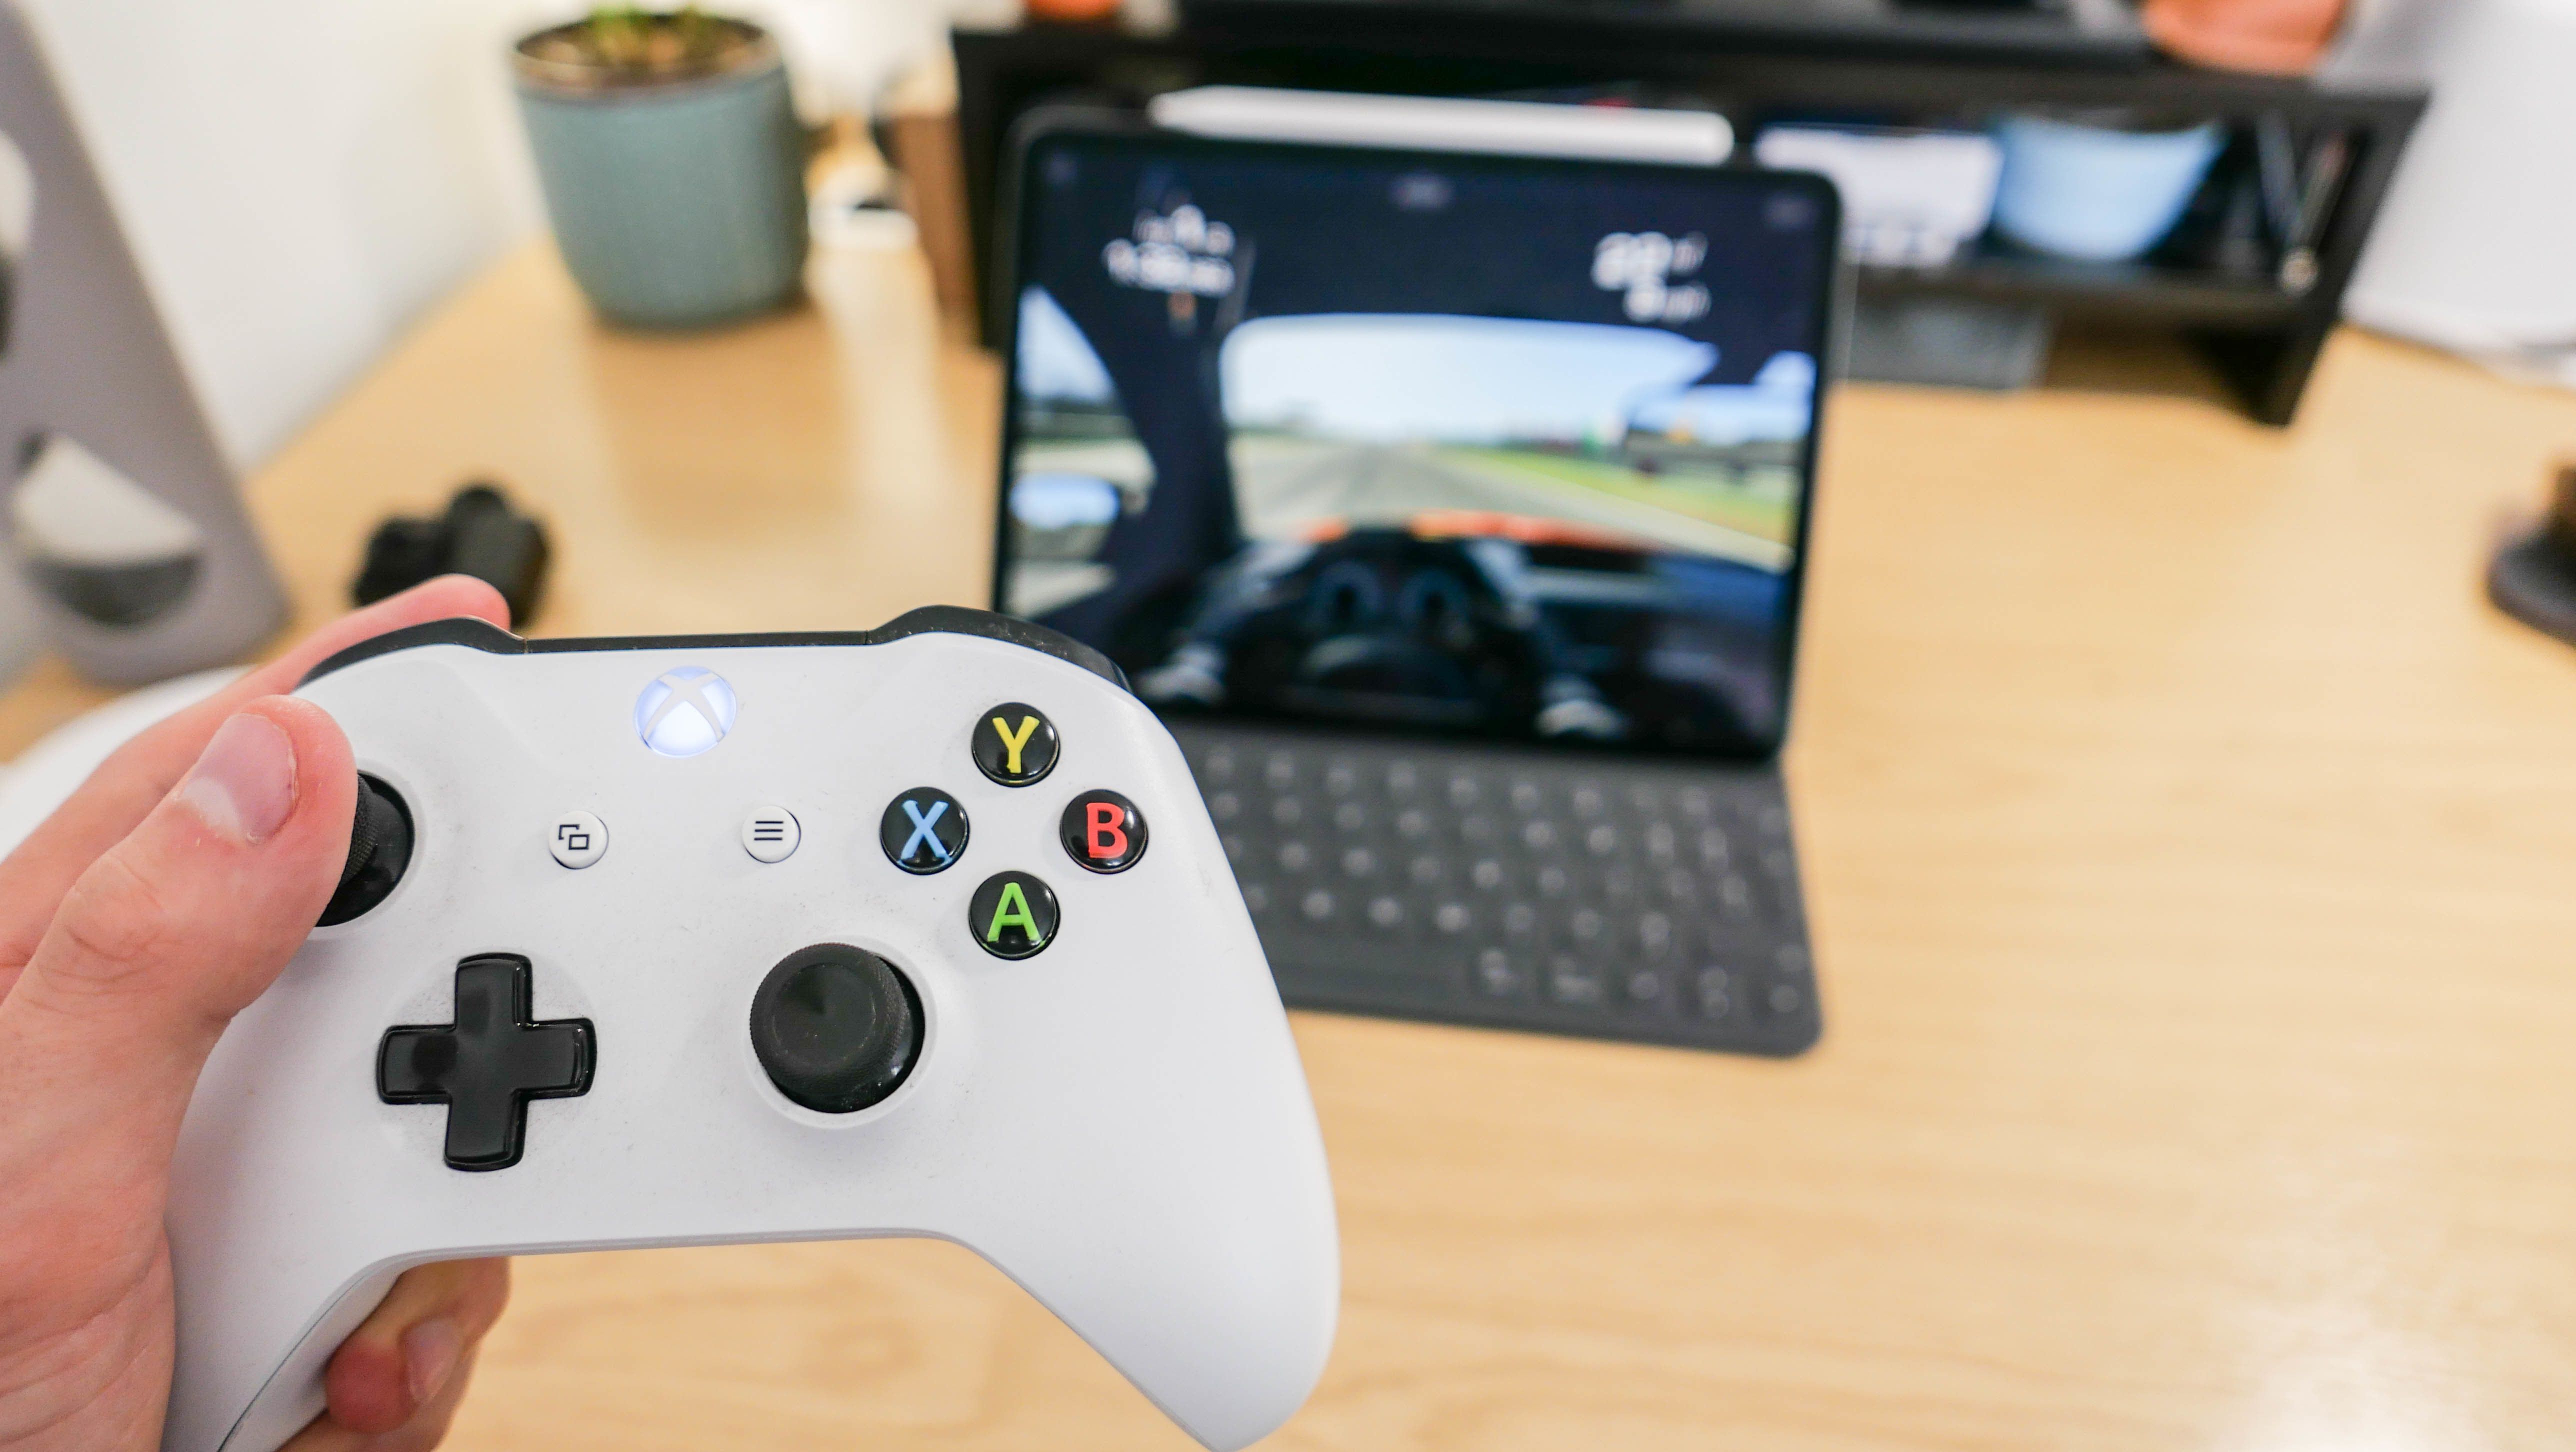 Photo of an Xbox One controller and iPad Pro